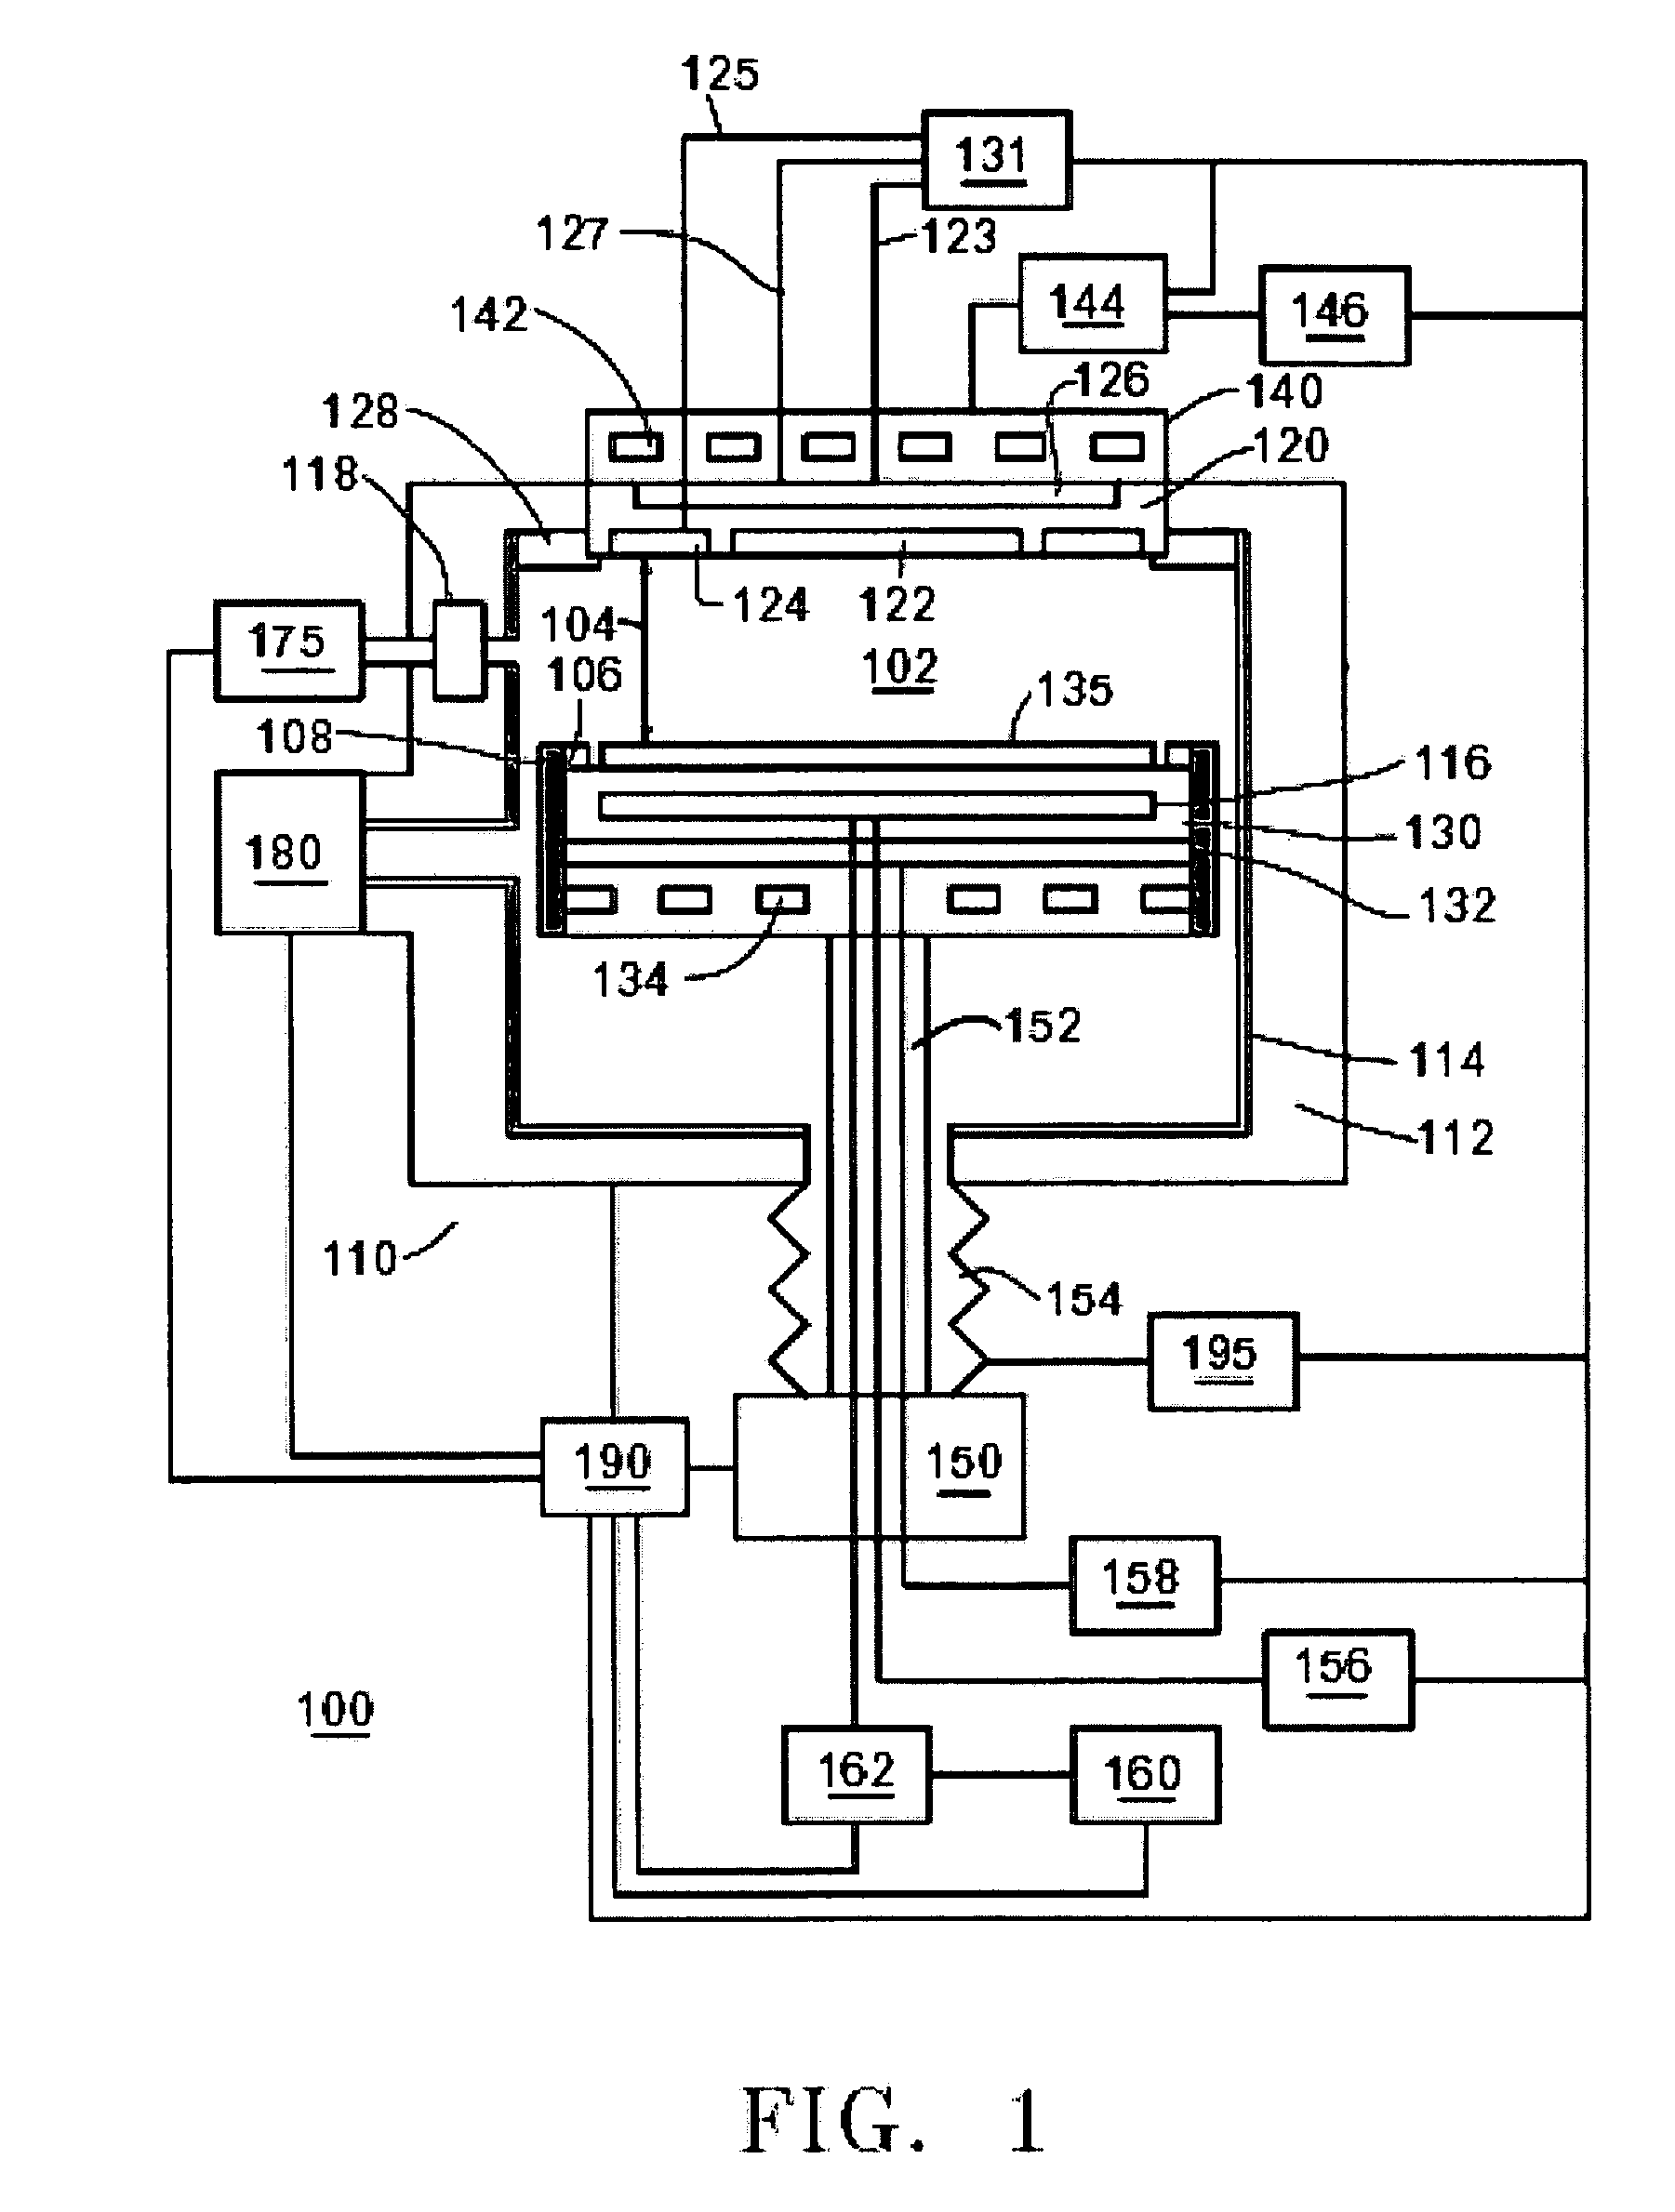 Method of improving the wafer to wafer uniformity and defectivity of a deposited dielectric film